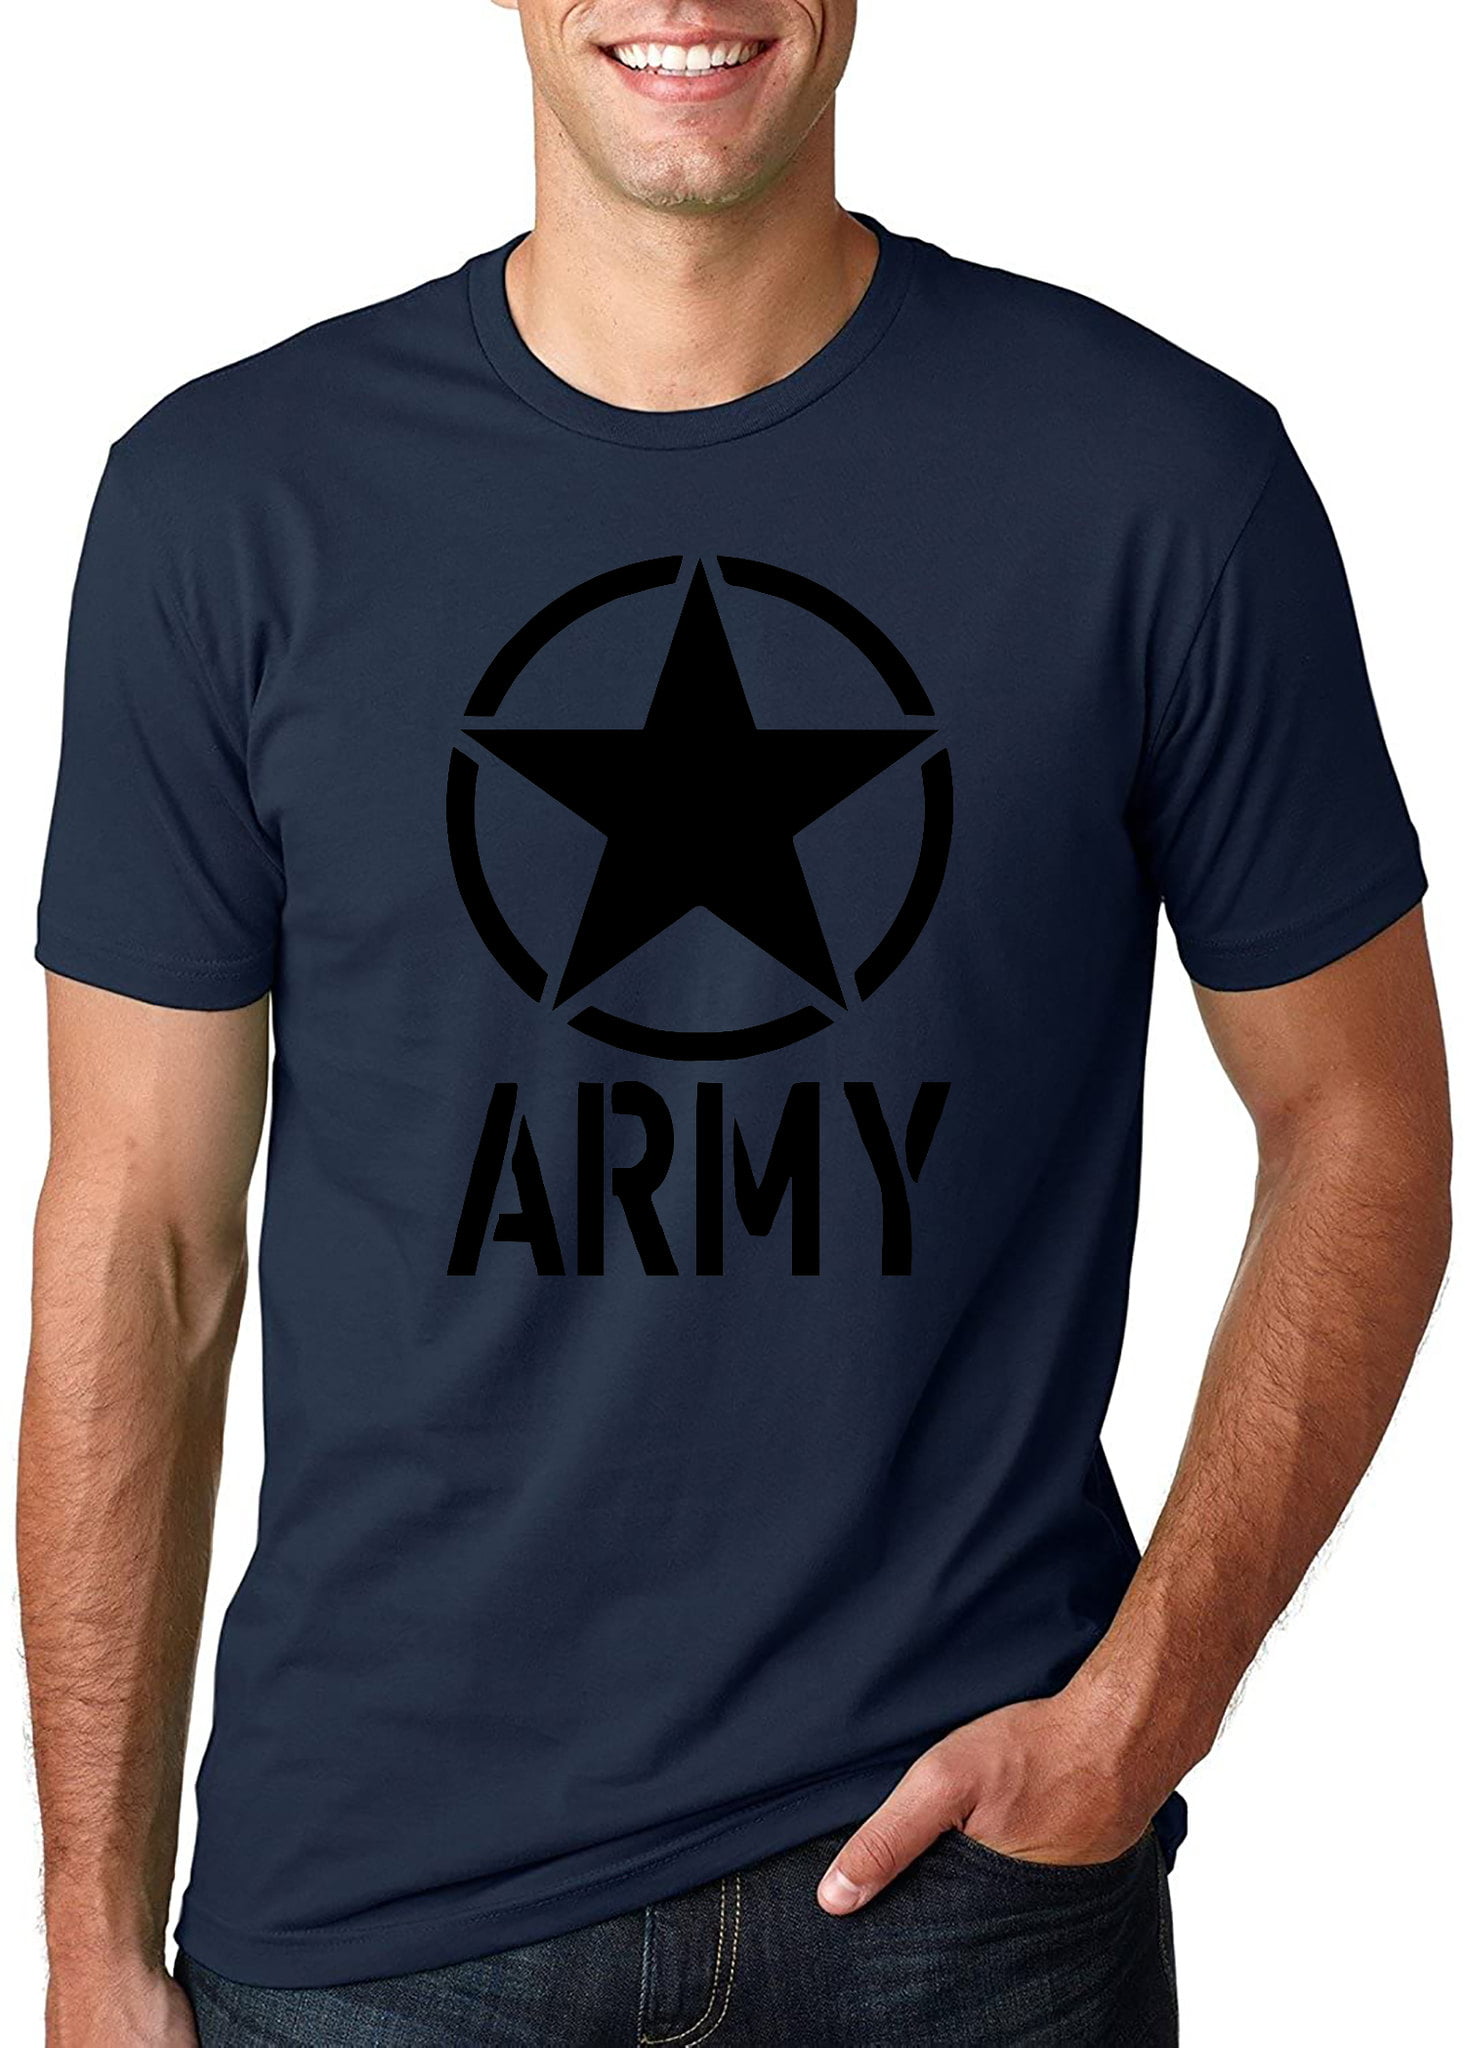 US Army Crest Adult T-Shirt Star Logo Chest 